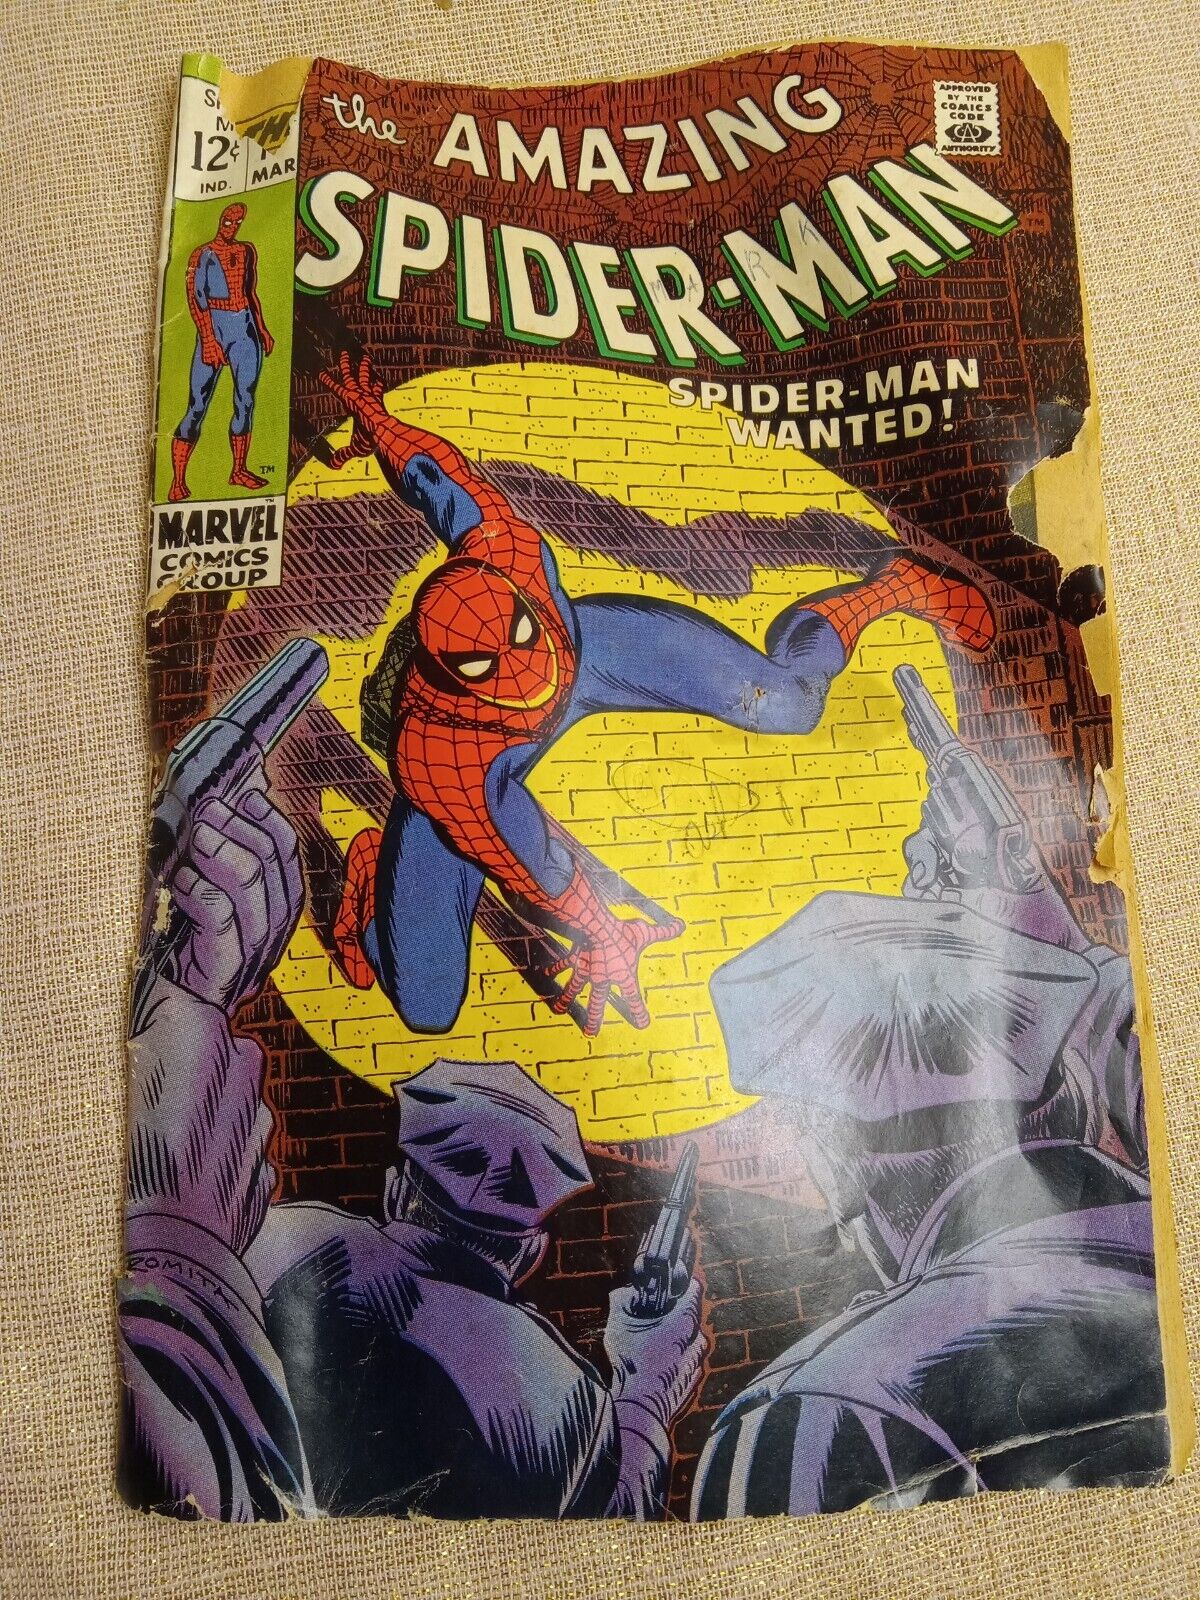 VTG The Amazing Spider-Man Spider-Man Wanted Comic Book 1969